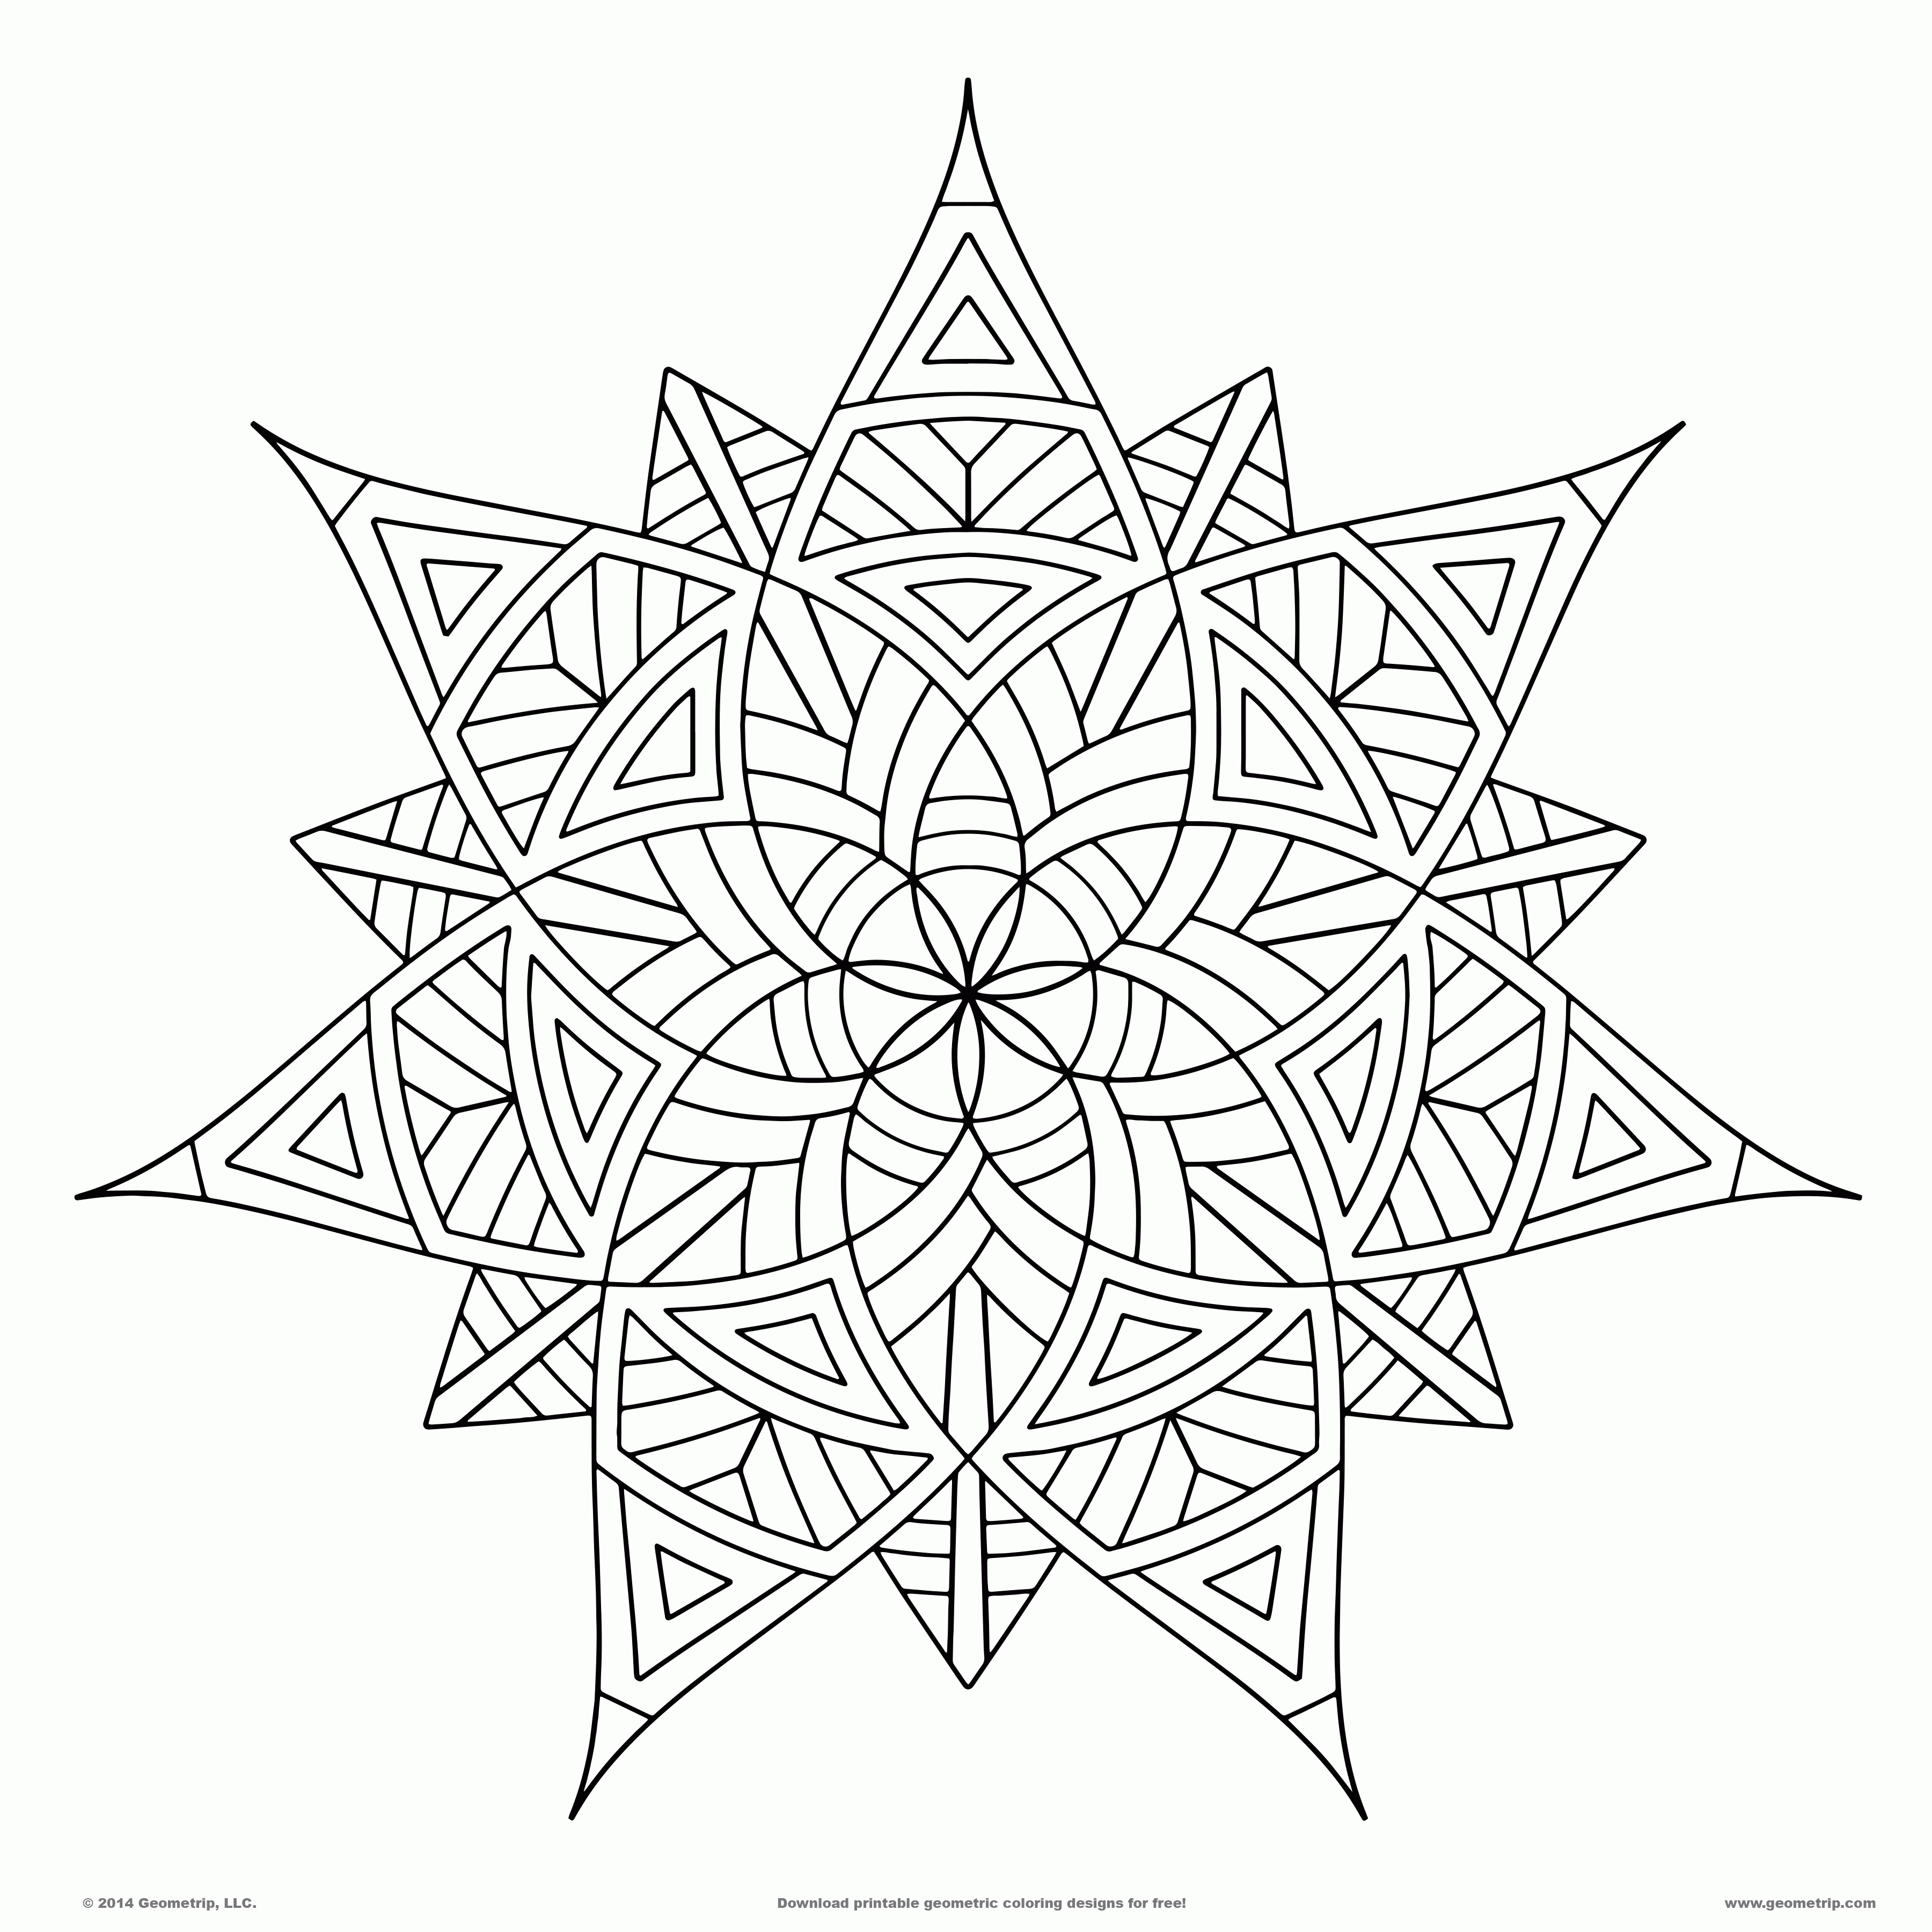 Geometric Design Coloring Pages To Print   Coloring Home